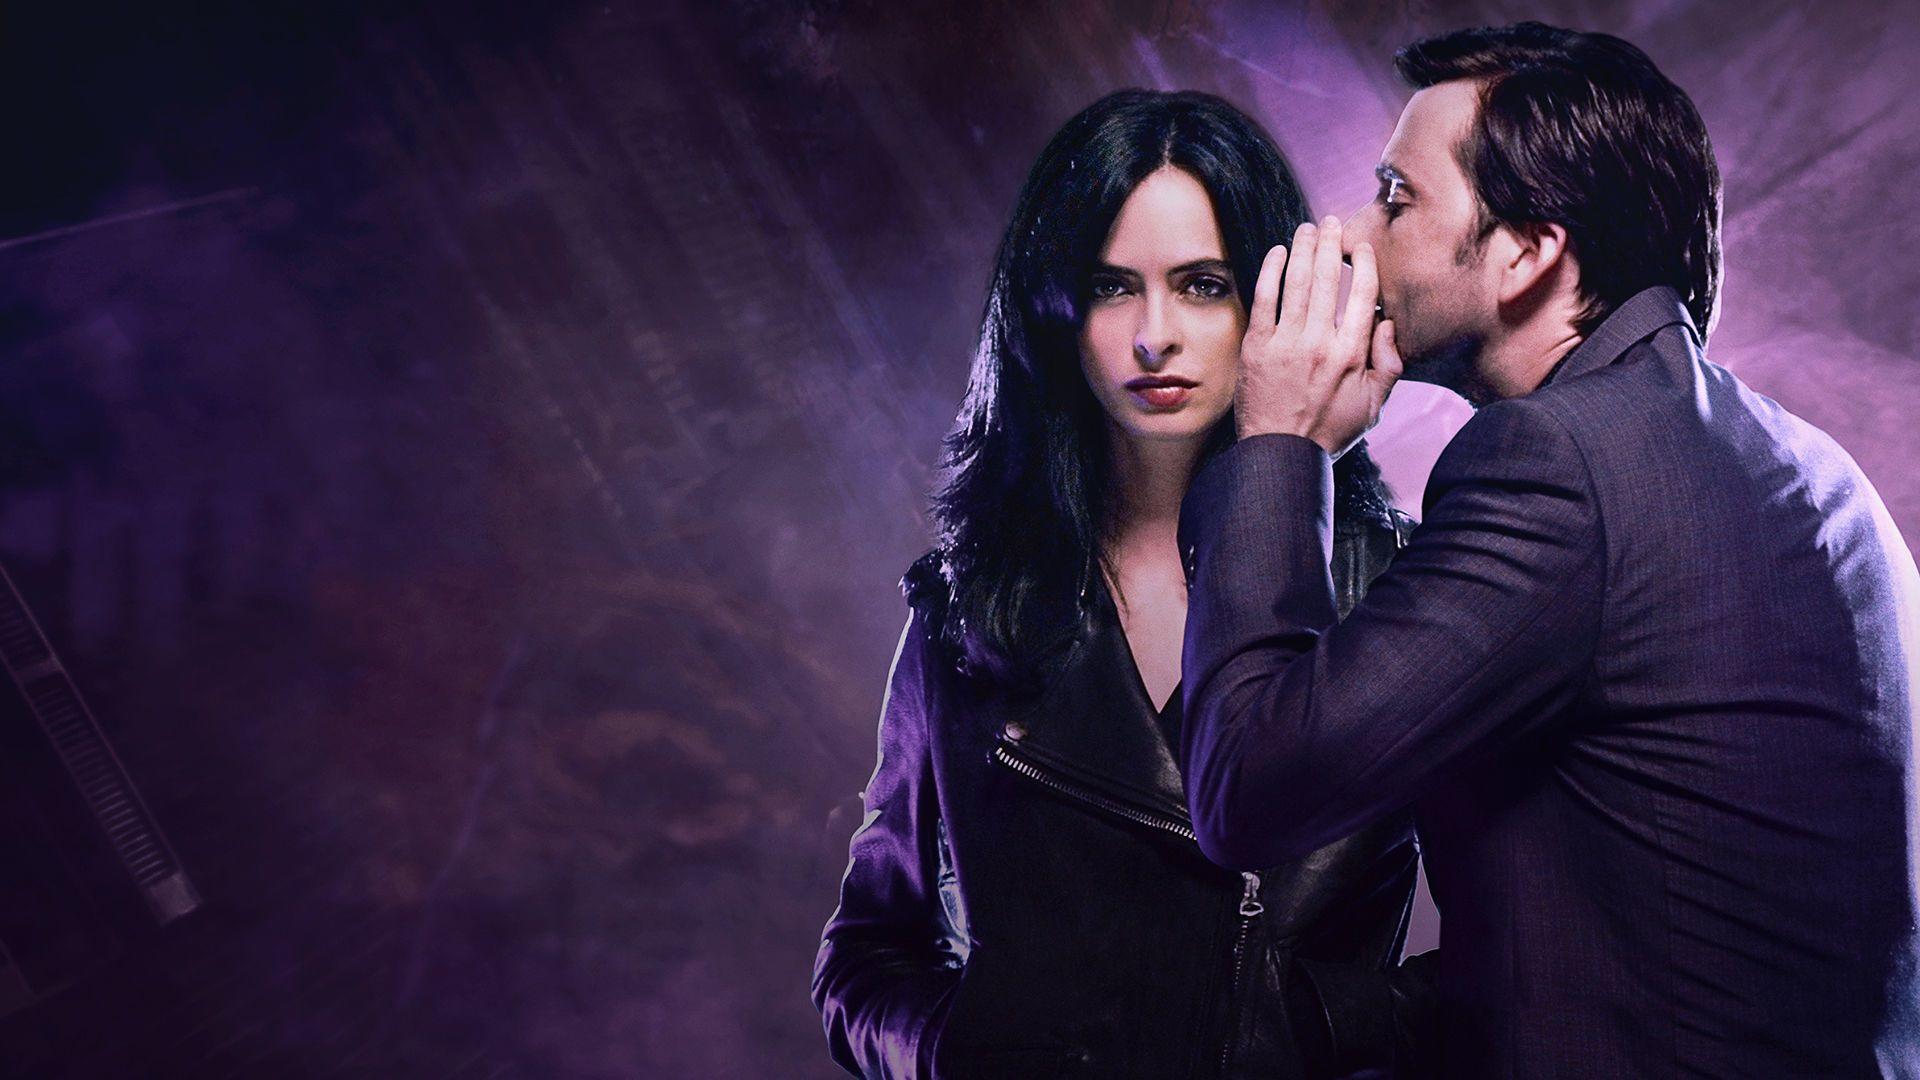 Smile! Jessica Jones Action Figure Featured in This Month's Loot